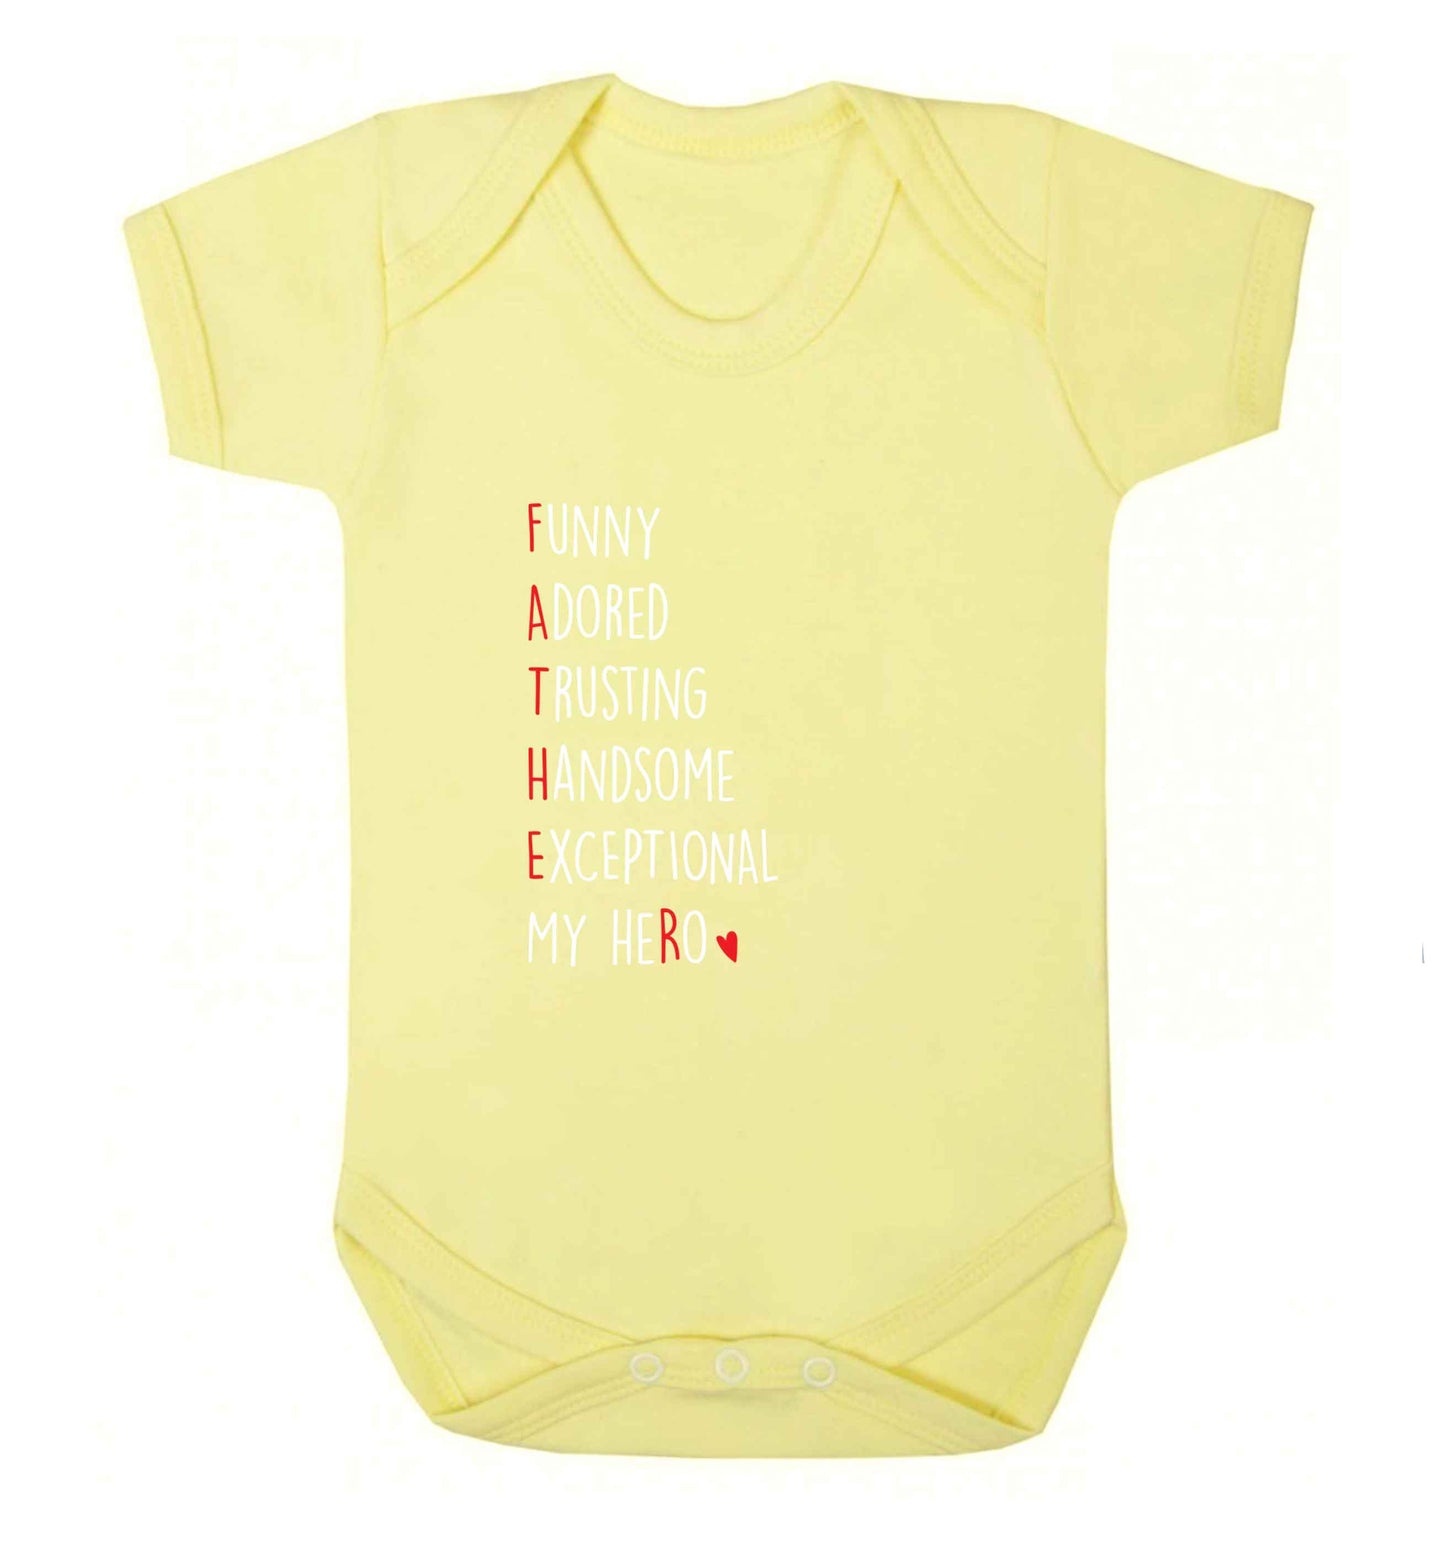 Father, funny adored trusting handsome exceptional my hero baby vest pale yellow 18-24 months